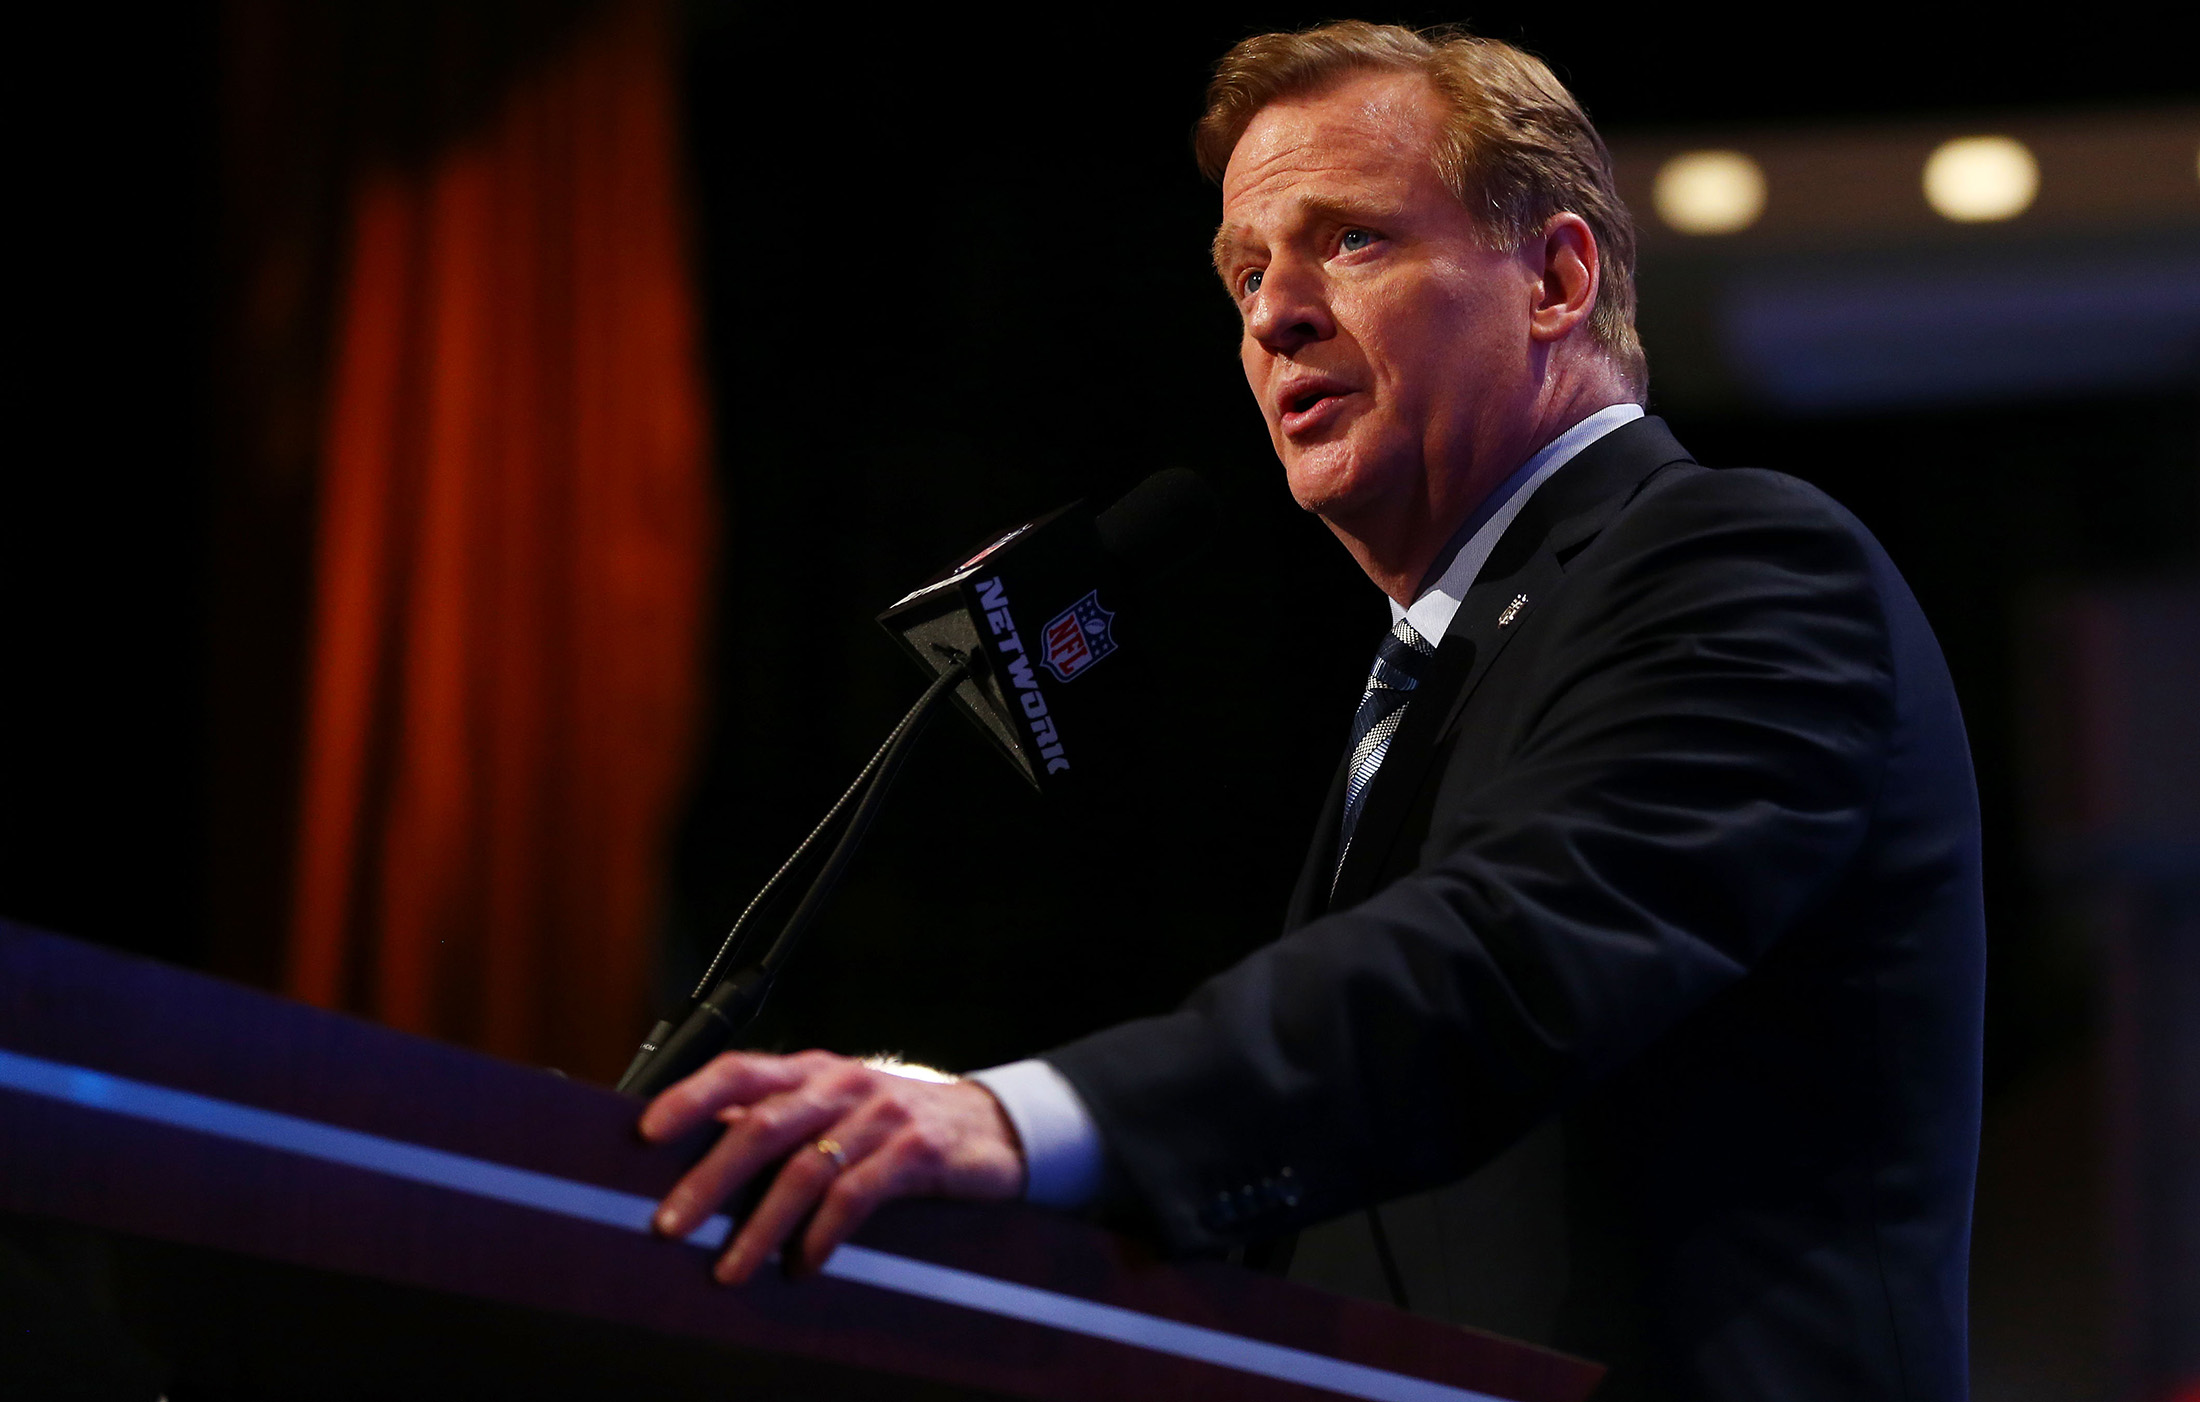 NFL's Goodell Made More Than All But 61 Public Company CEOs - Bloomberg